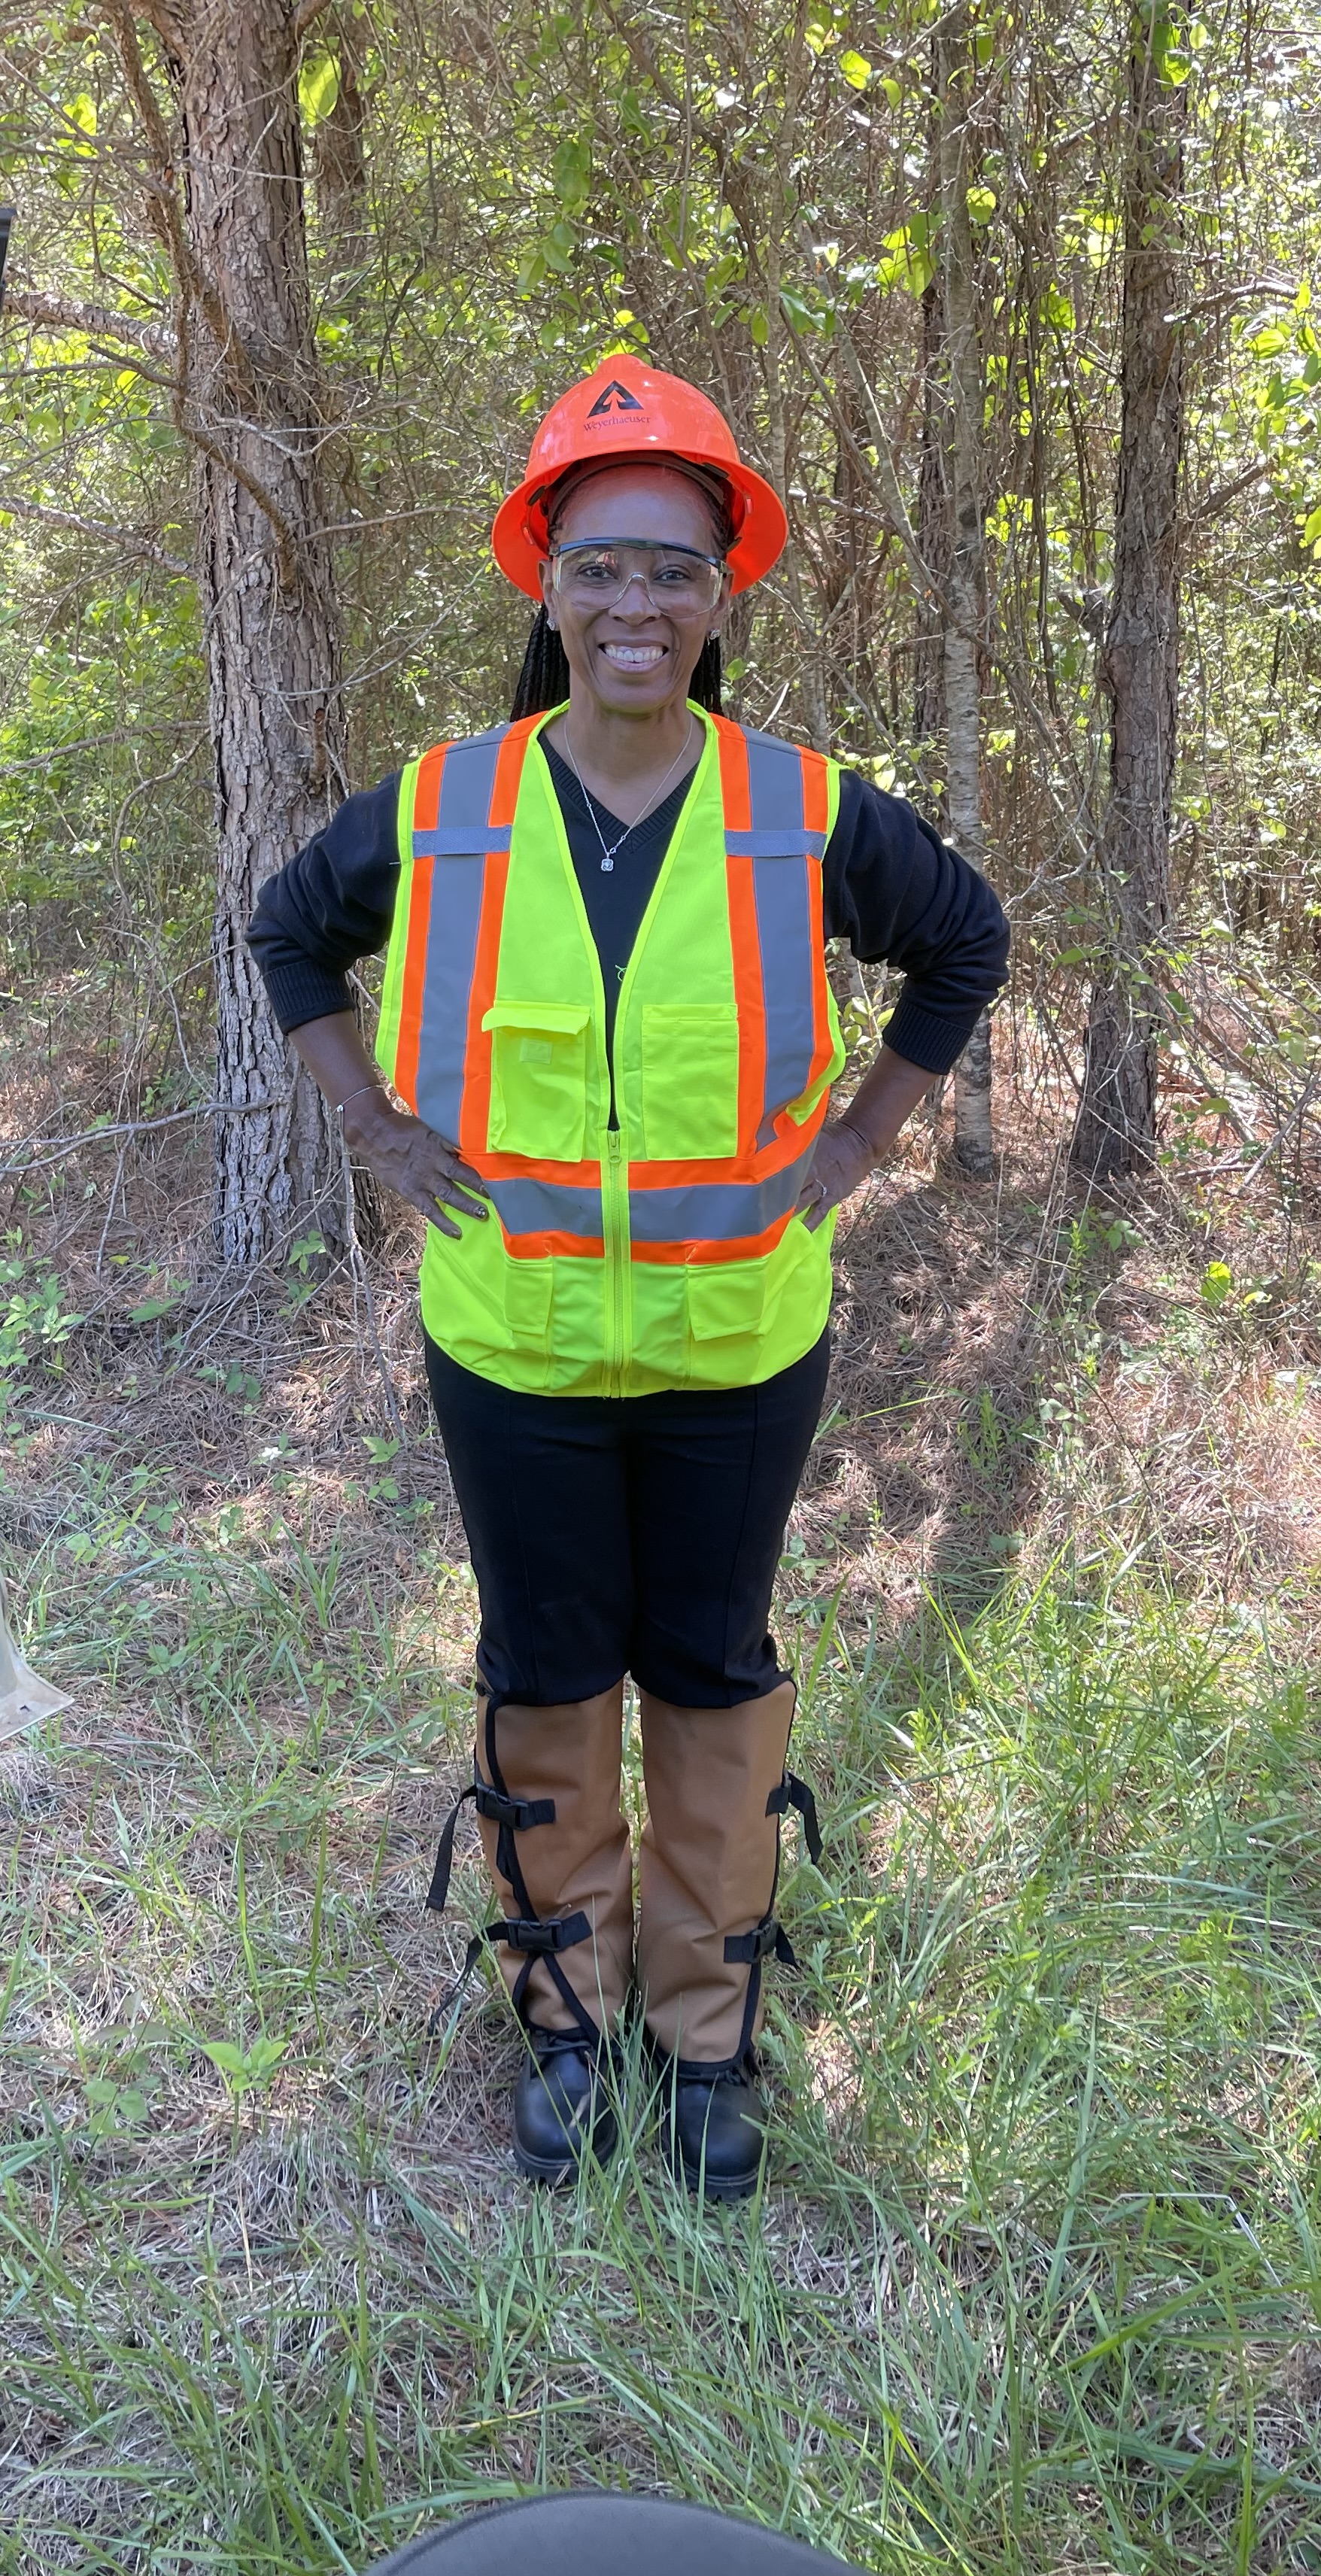 Image of Suzy, who has traveled to our Columbus and Meridian, Miss., Timberlands with our internal audit team to observe a cruising audit and participate in a woods tour.